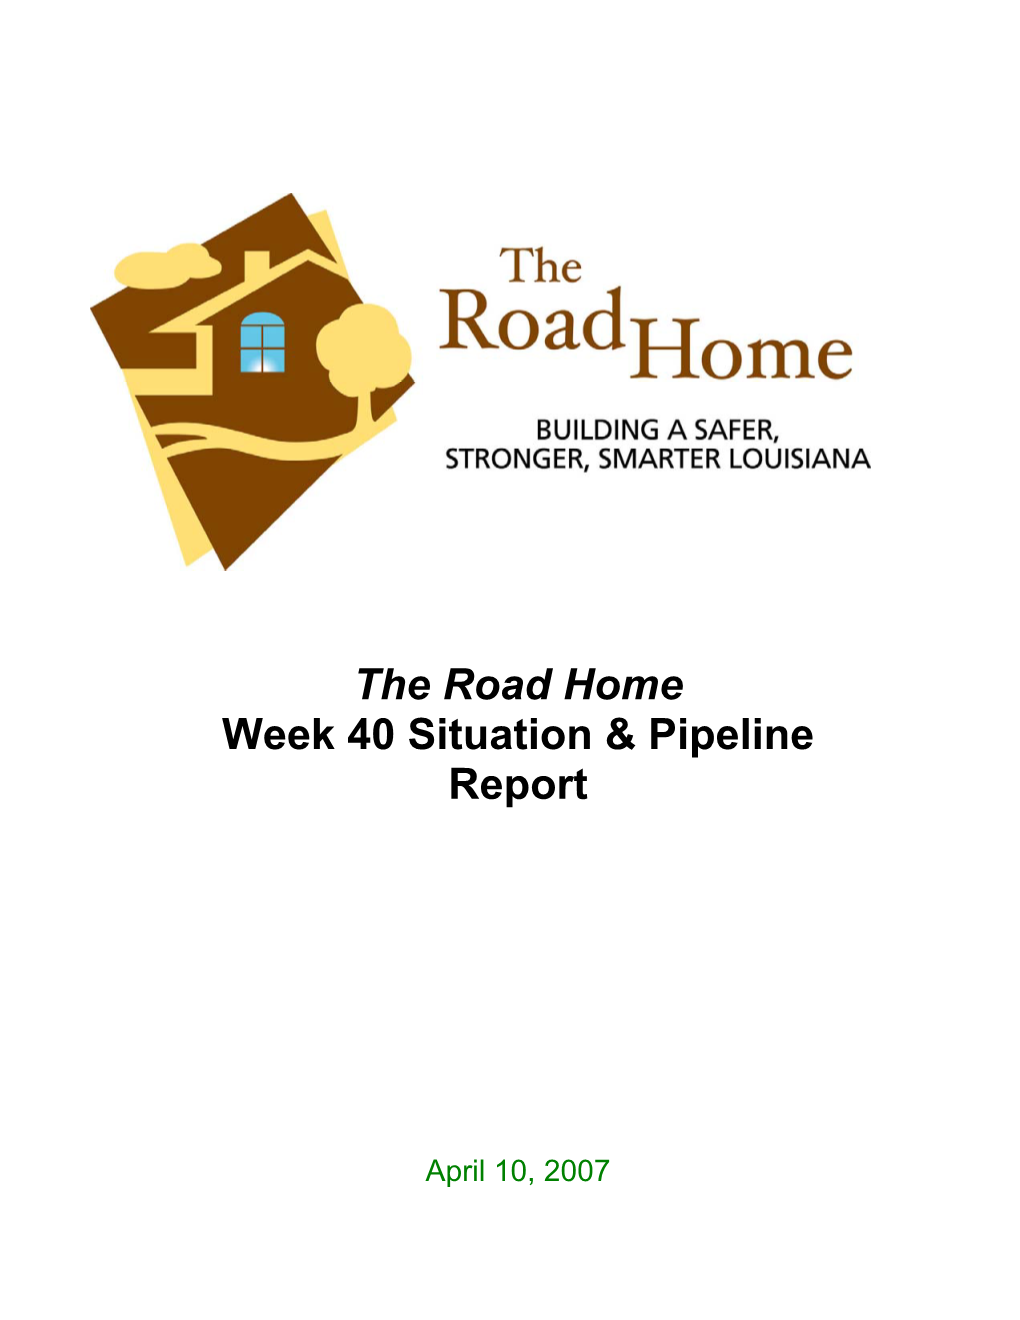 The Road Home Week 40 Situation & Pipeline Report